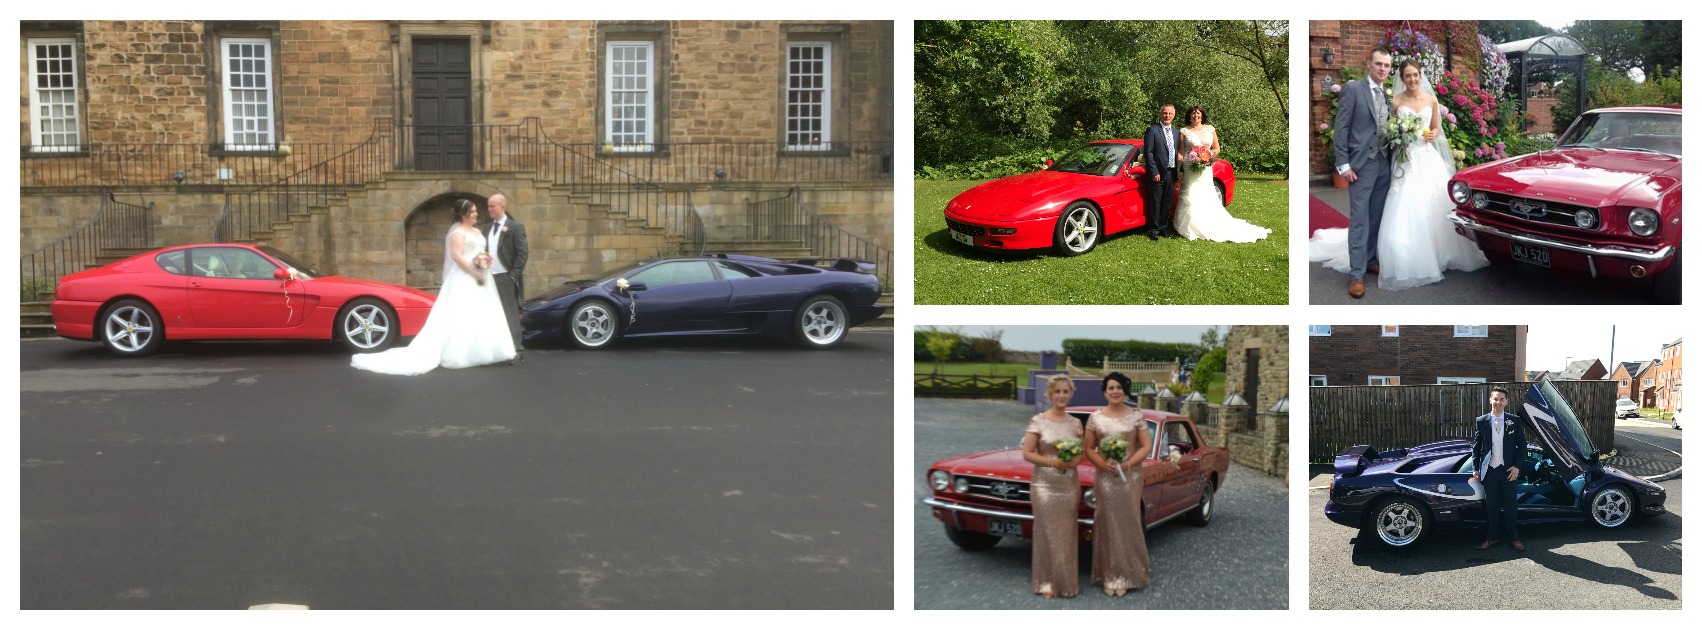 Supercar Weddings 5 picture wide collage